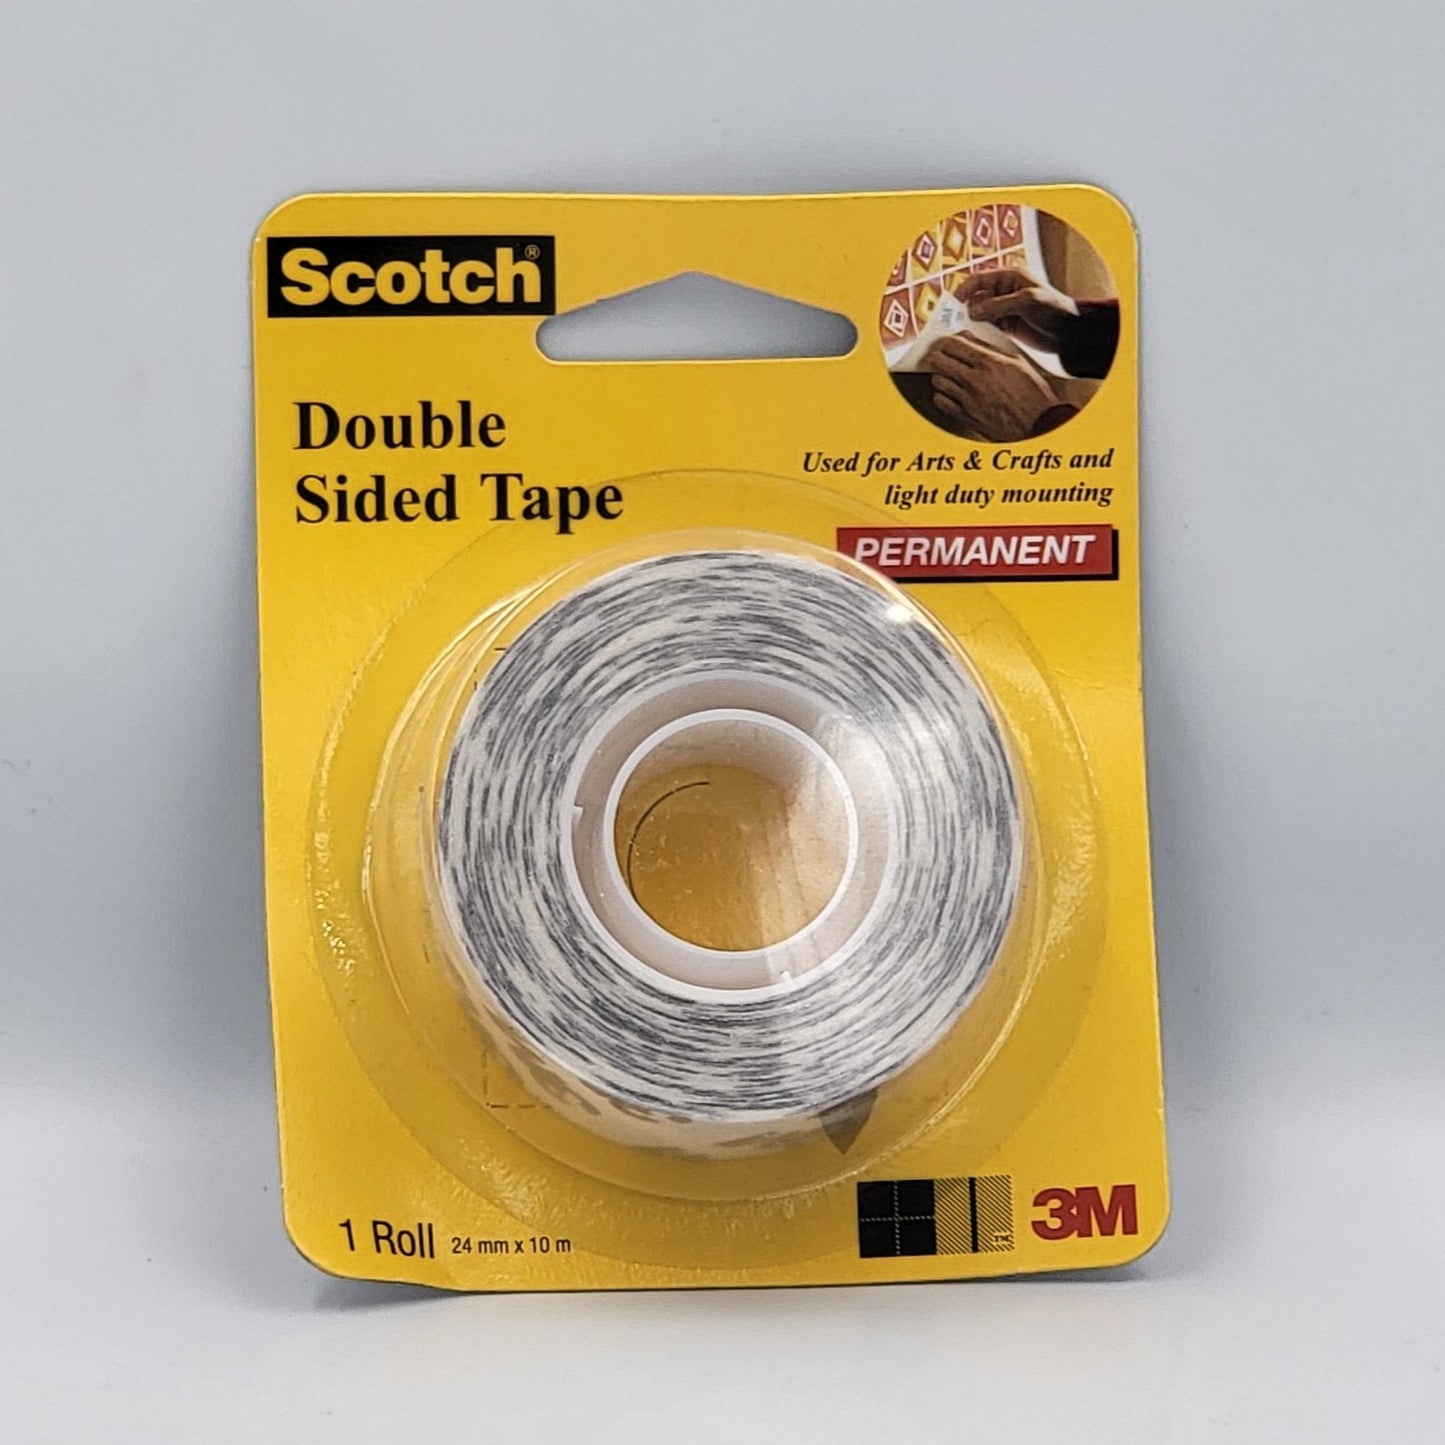 3M Double Sided Tape without Foam, 24mm x 10m